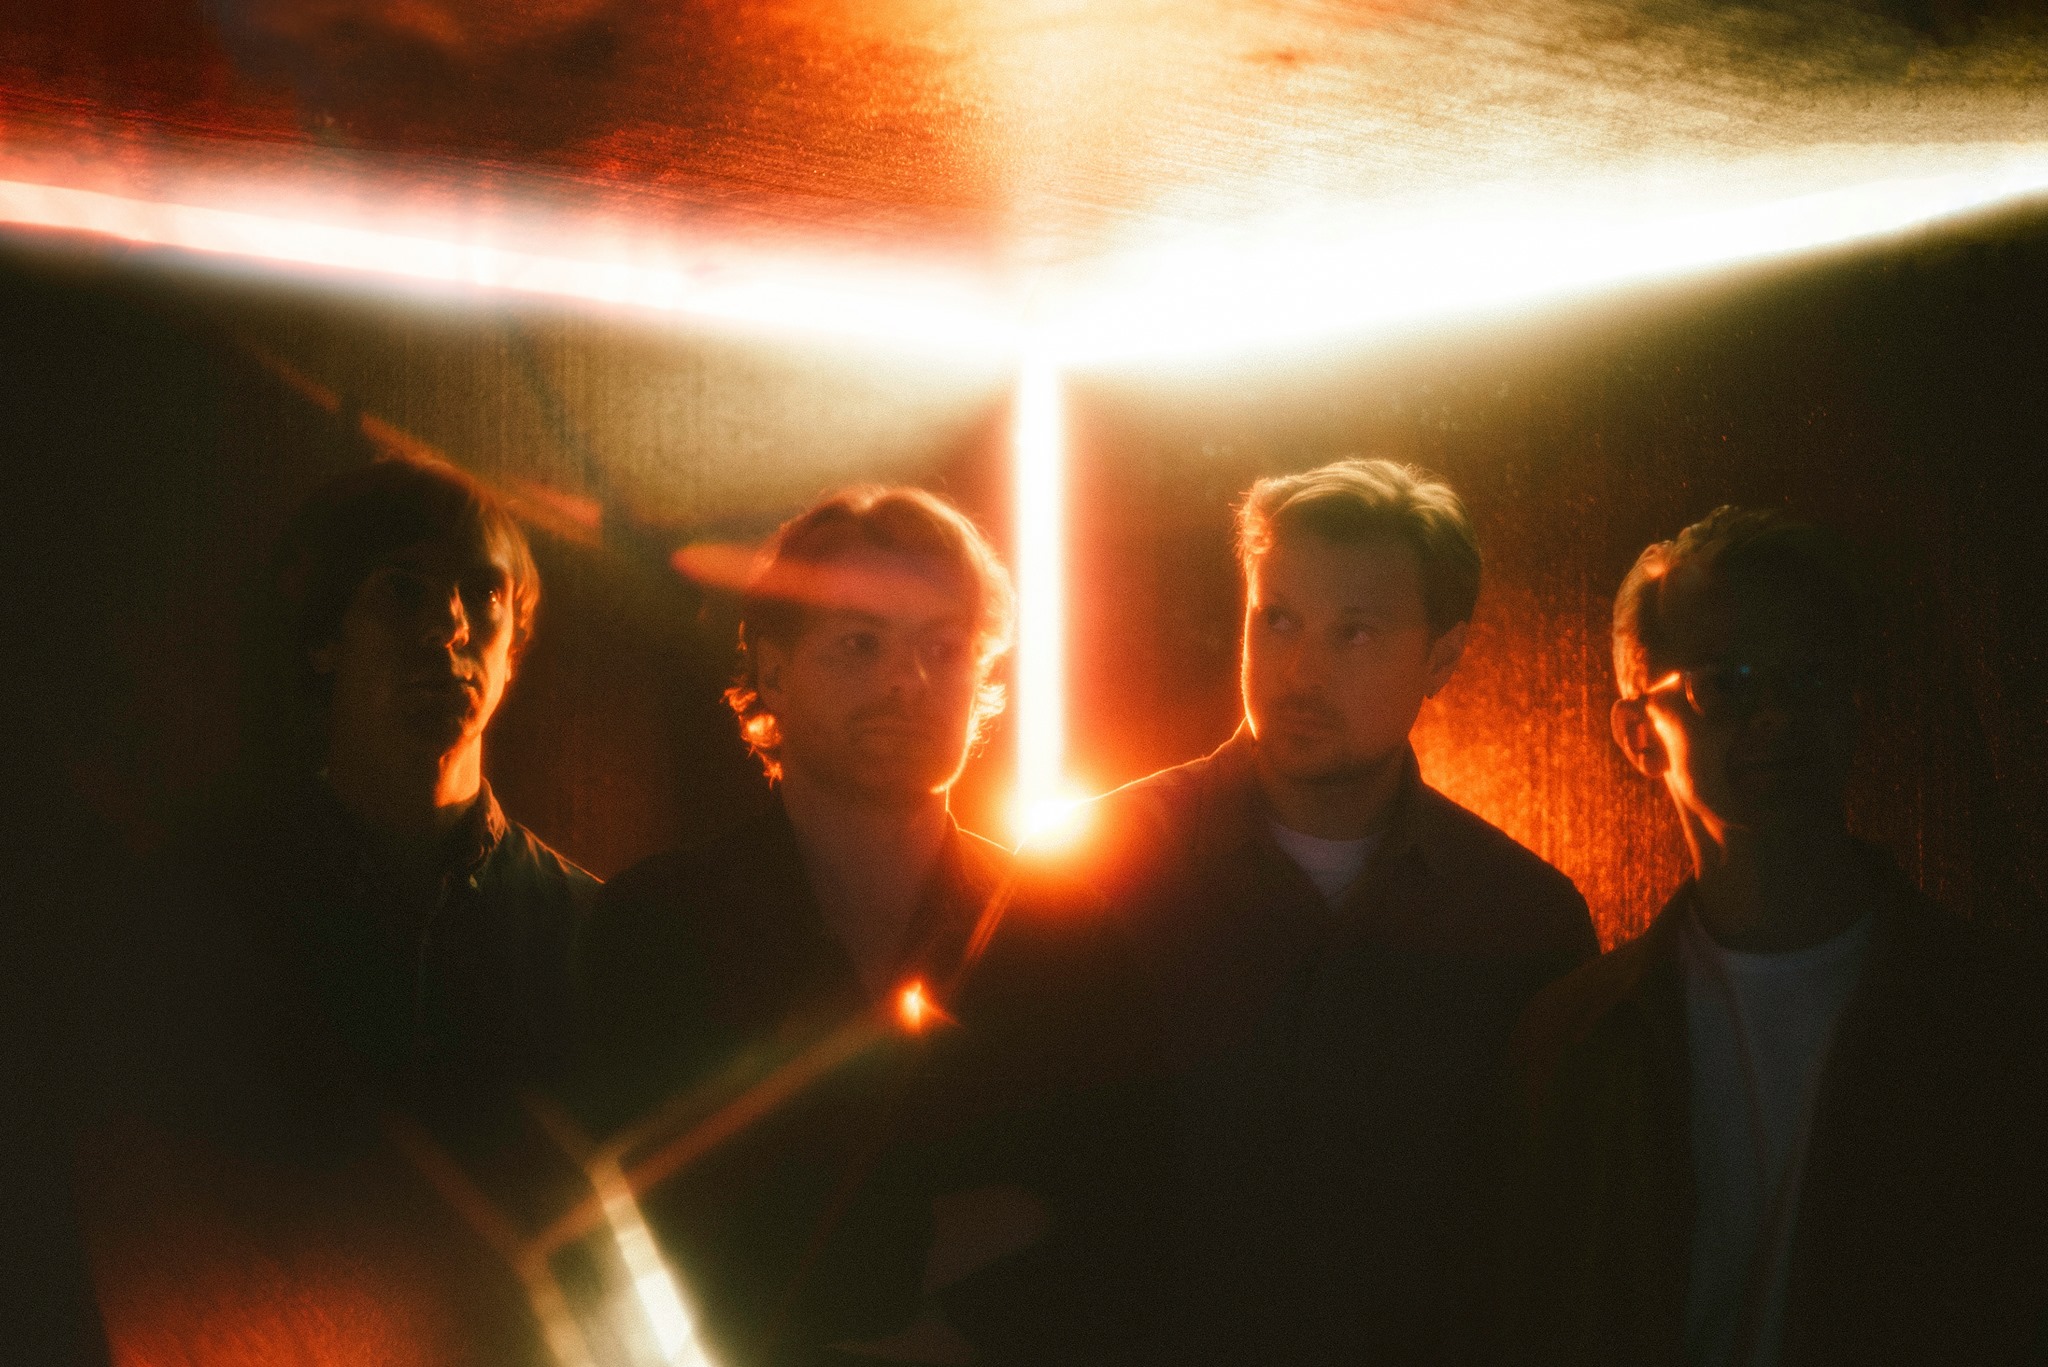 DJANGO DJANGO unveil new single and video ‘FREE FROM GRAVITY’  Their new album ‘GLOWING IN THE DARK’ out via Because/Caroline on FEBRUARY 12.